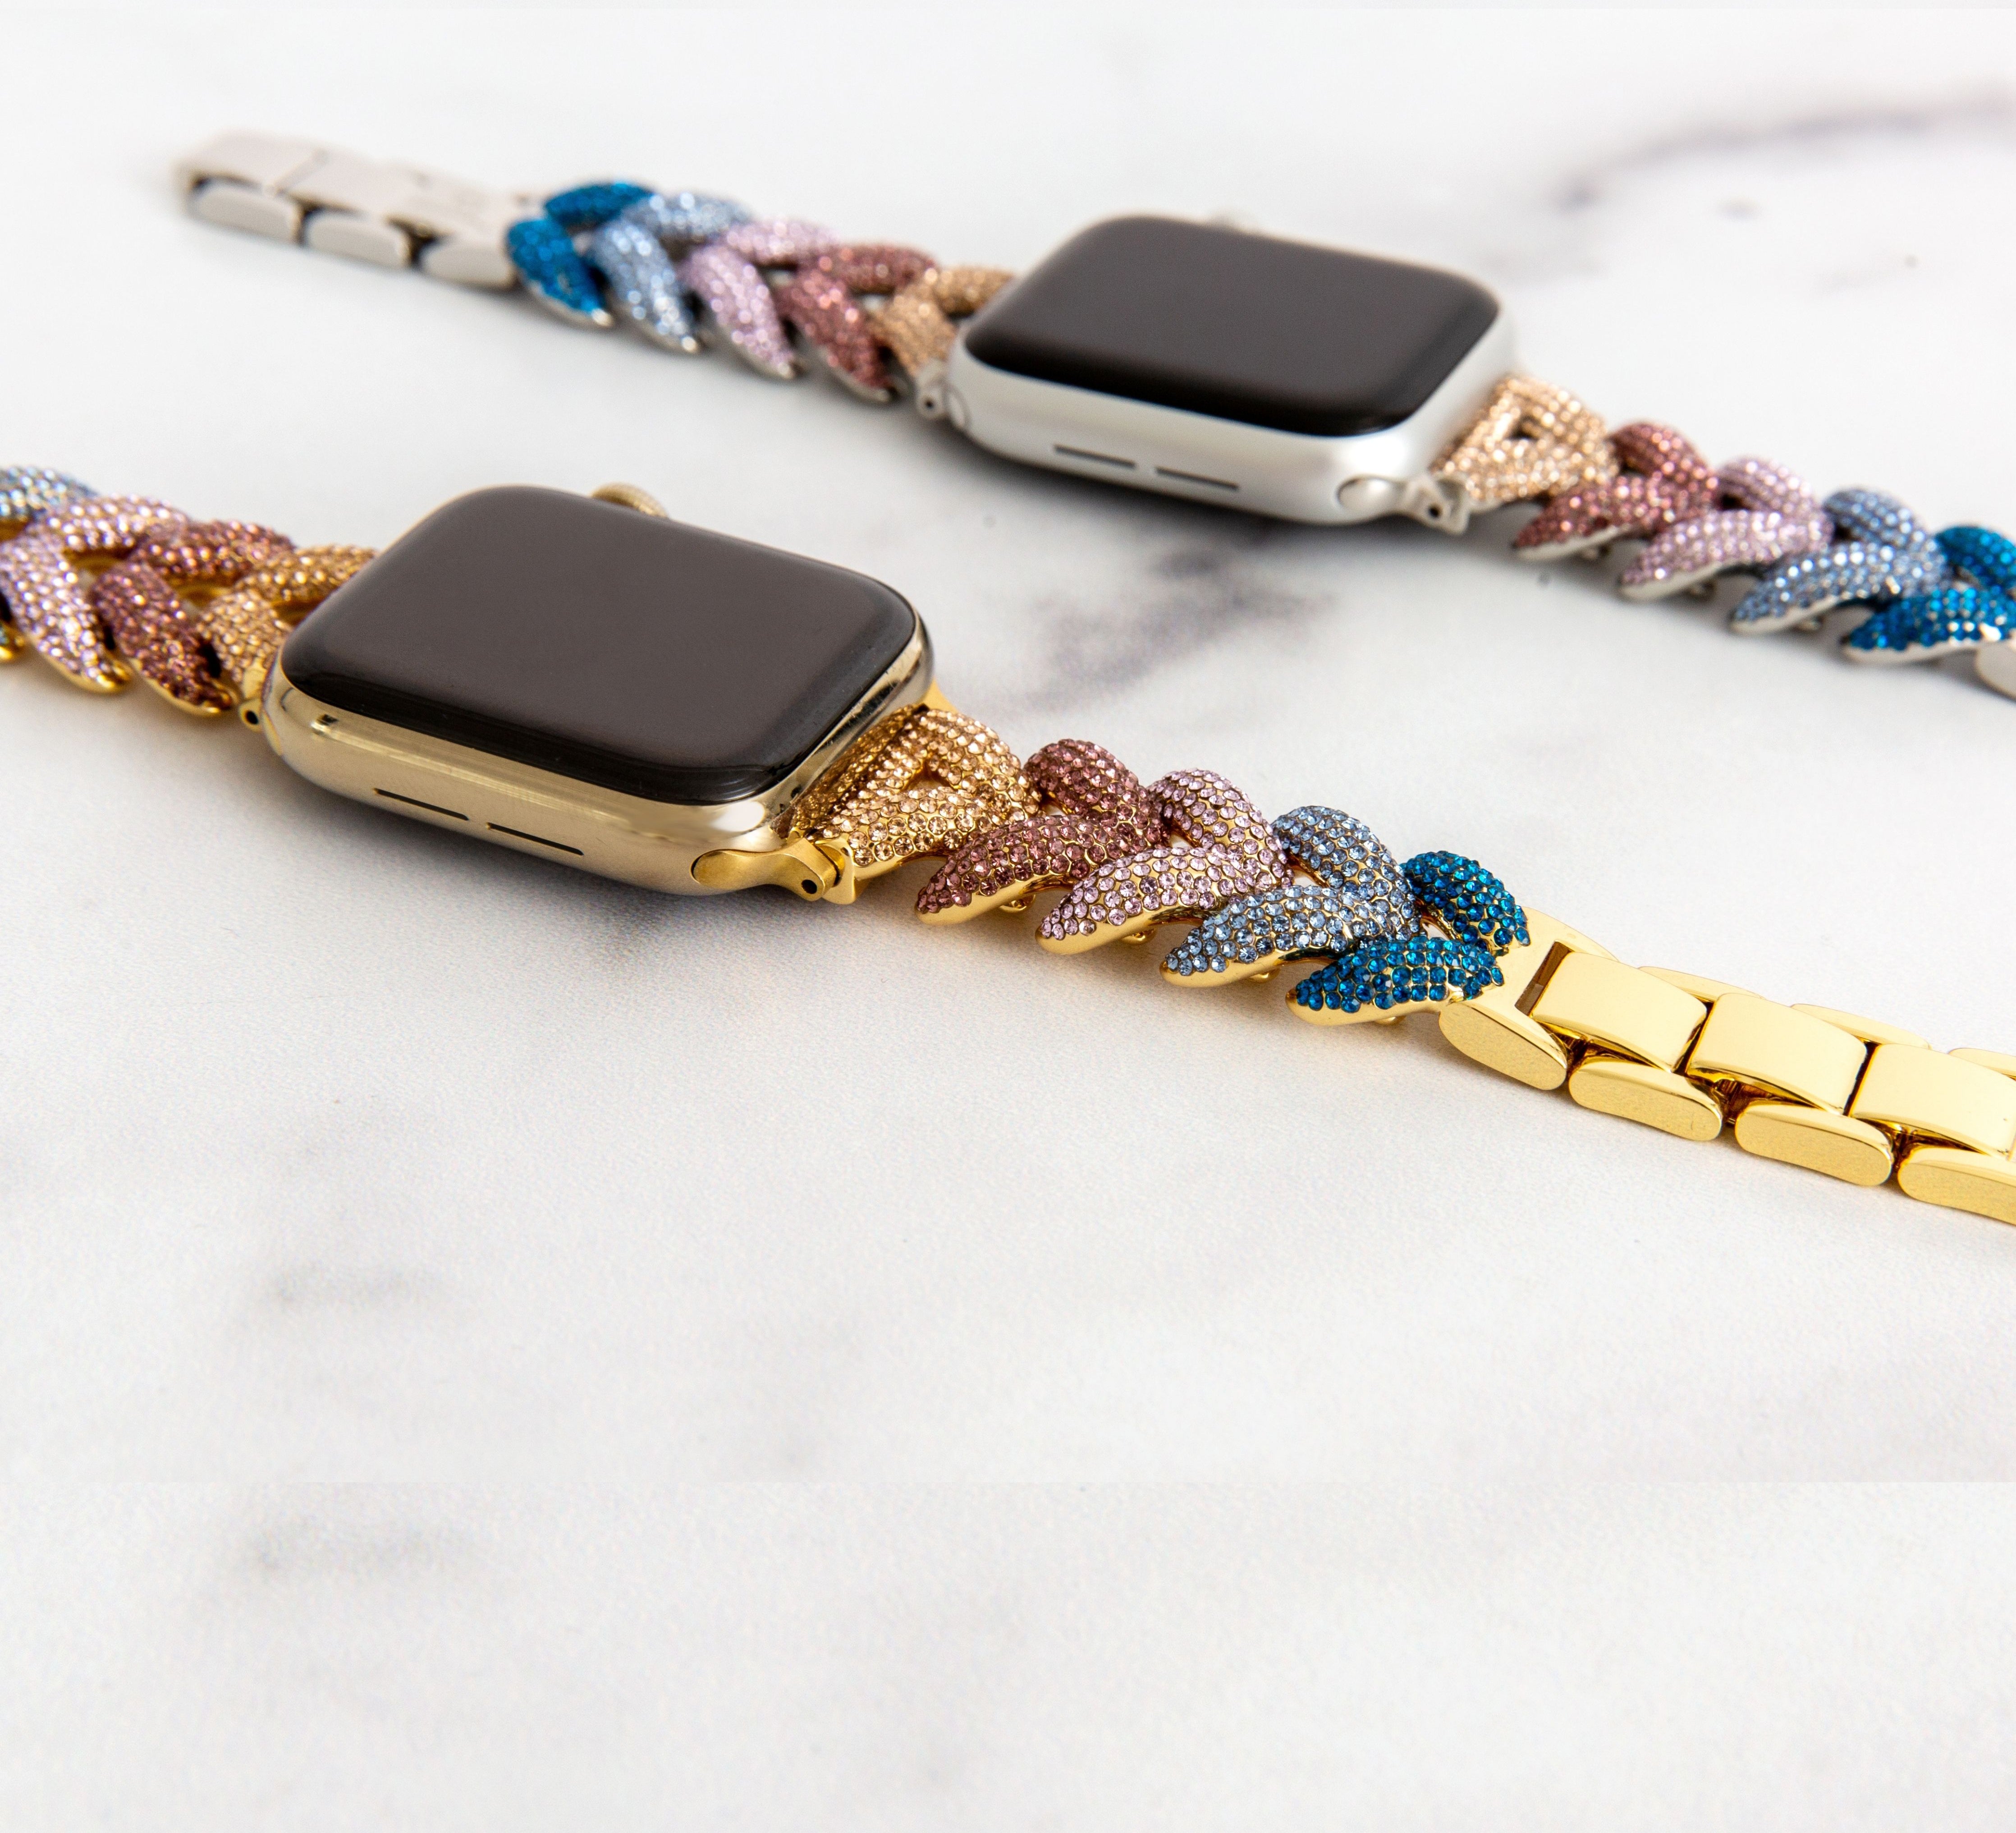 Ombrè Herringbone Band for the Apple Watch - Goldenerre Women's Apple Watch Bands and Jewelry